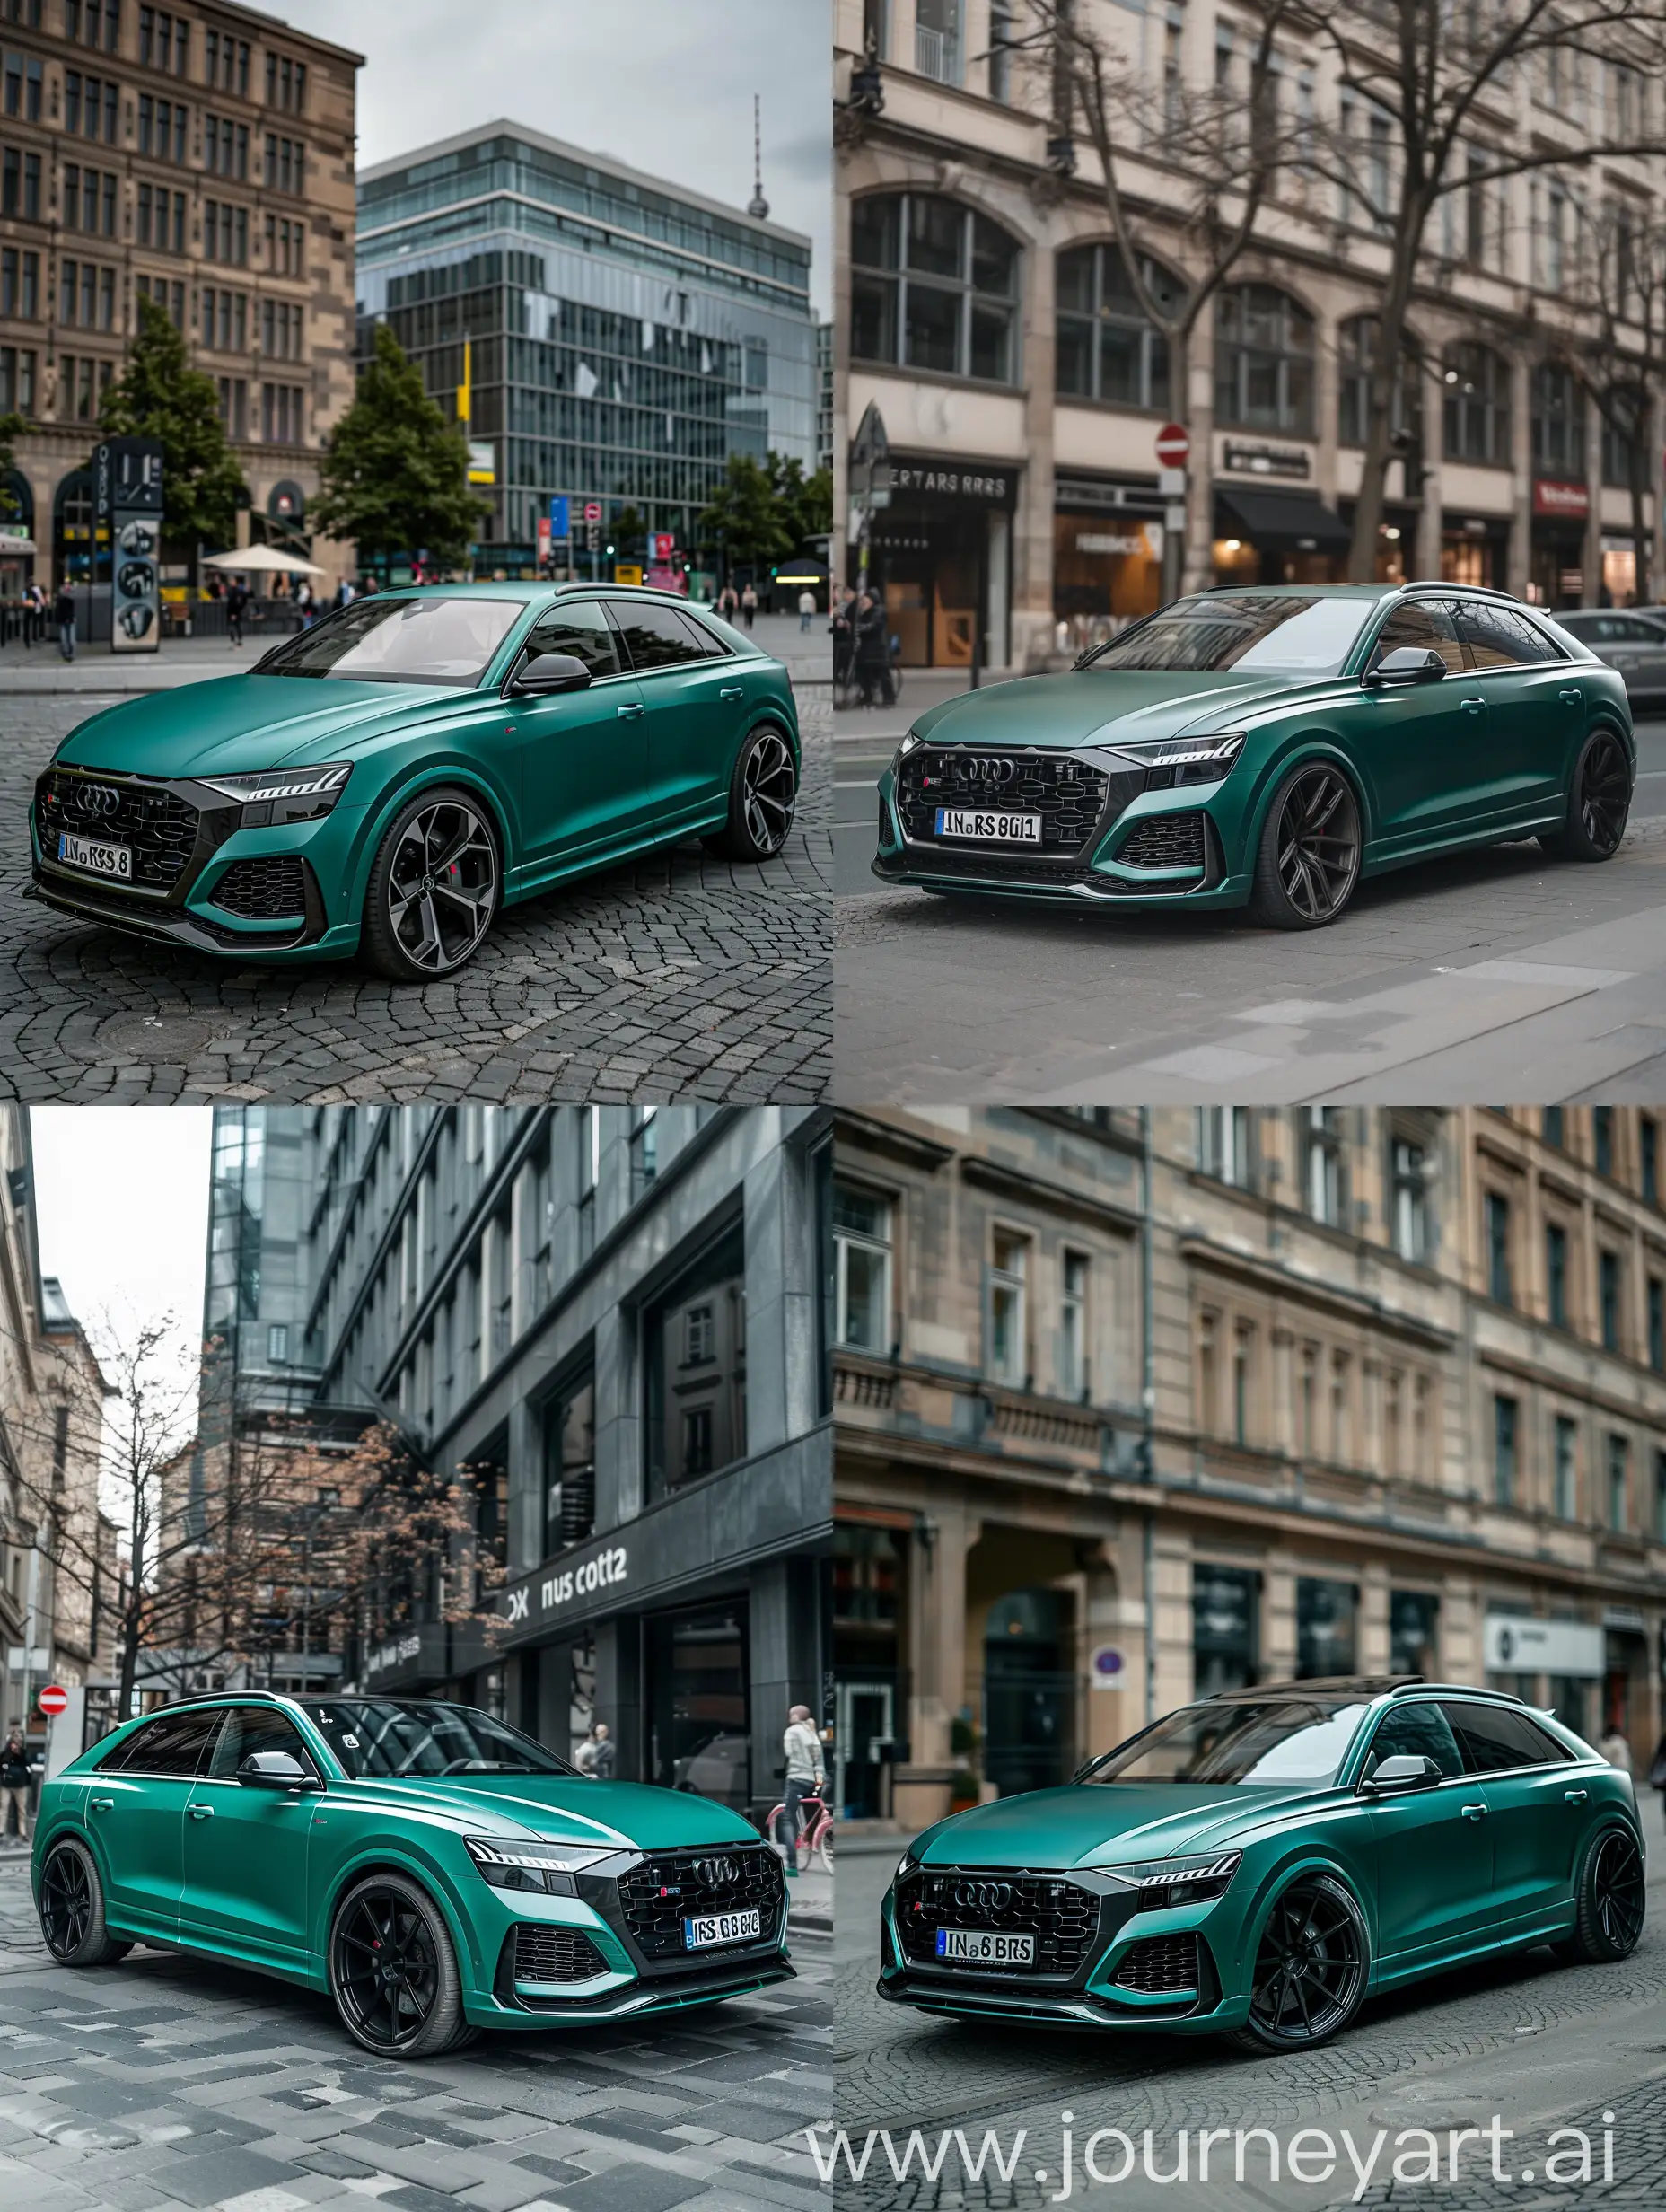 Matte-Deep-Teal-Audi-RSQ8-with-Black-Rims-in-Urban-Berlin-Setting